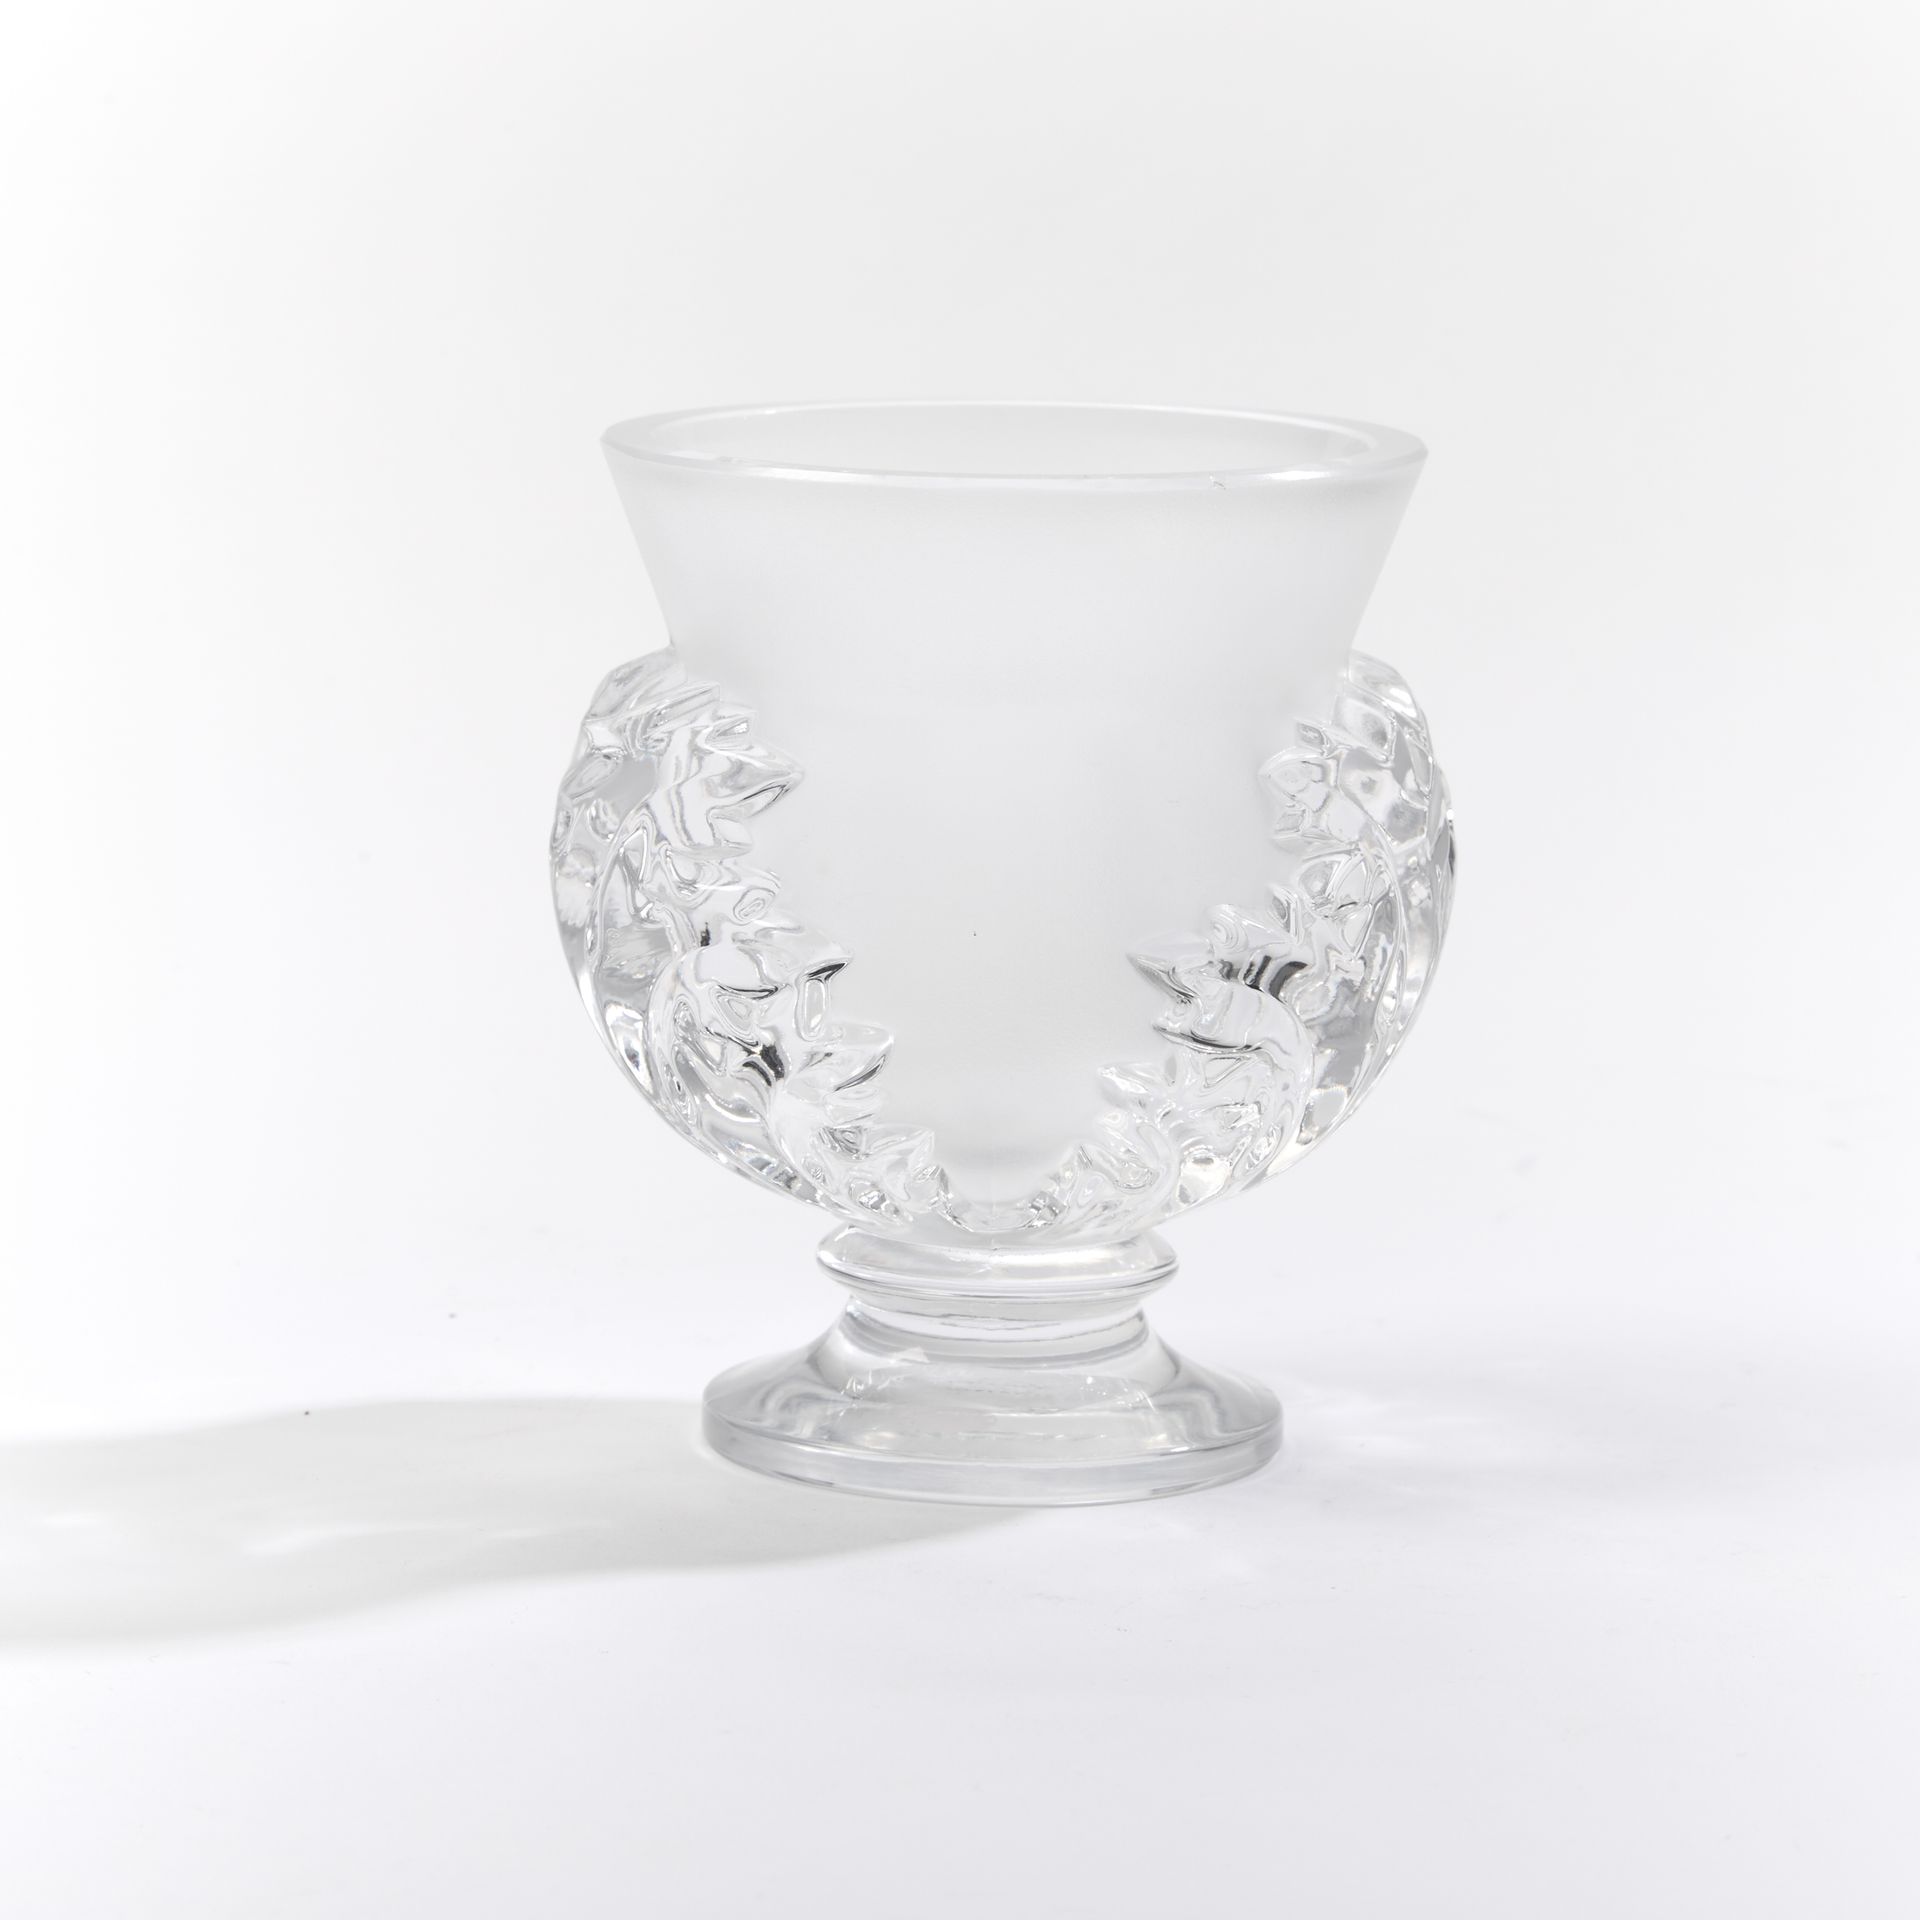 Null LALIQUE. 
Partially frosted molded glass vase, "Saint-Cloud" model, with fl&hellip;